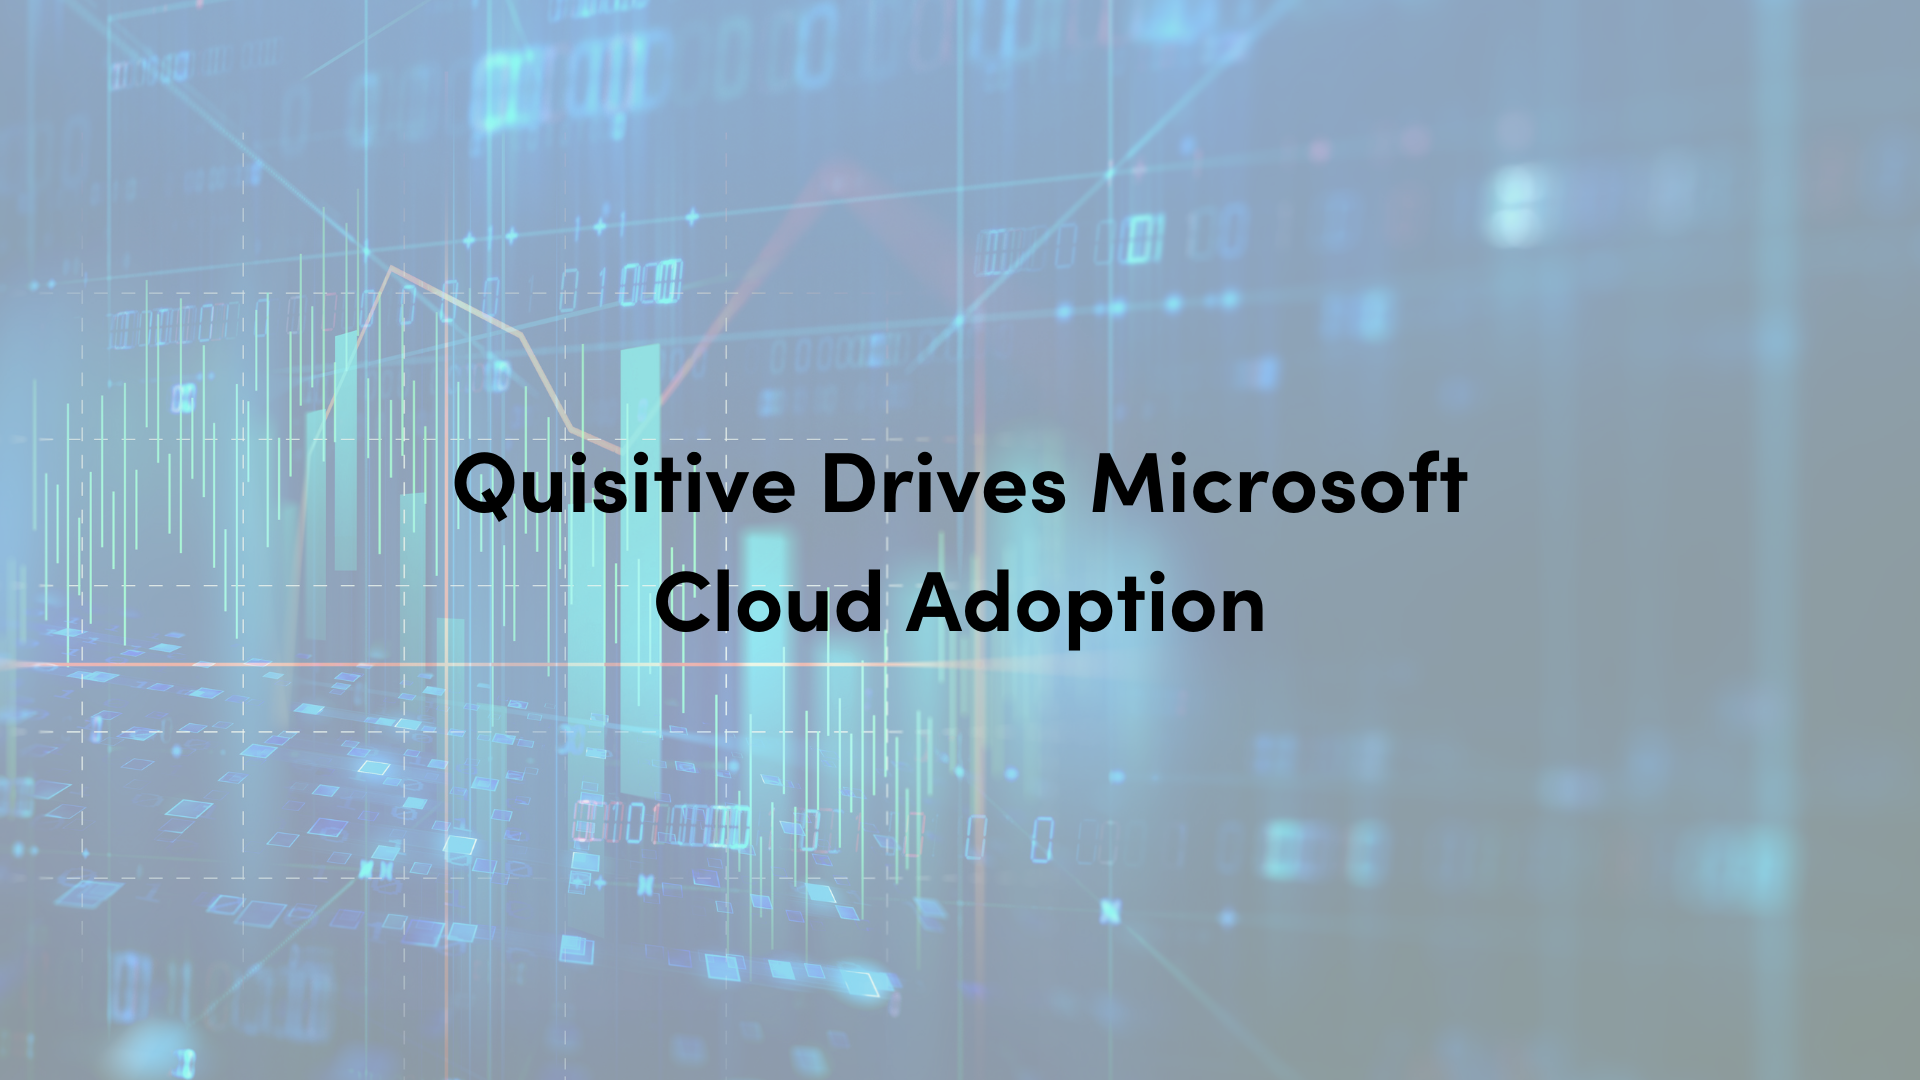 Blue background with digital imagery with text that reads Quisitive Drives Microsoft Cloud Adoption